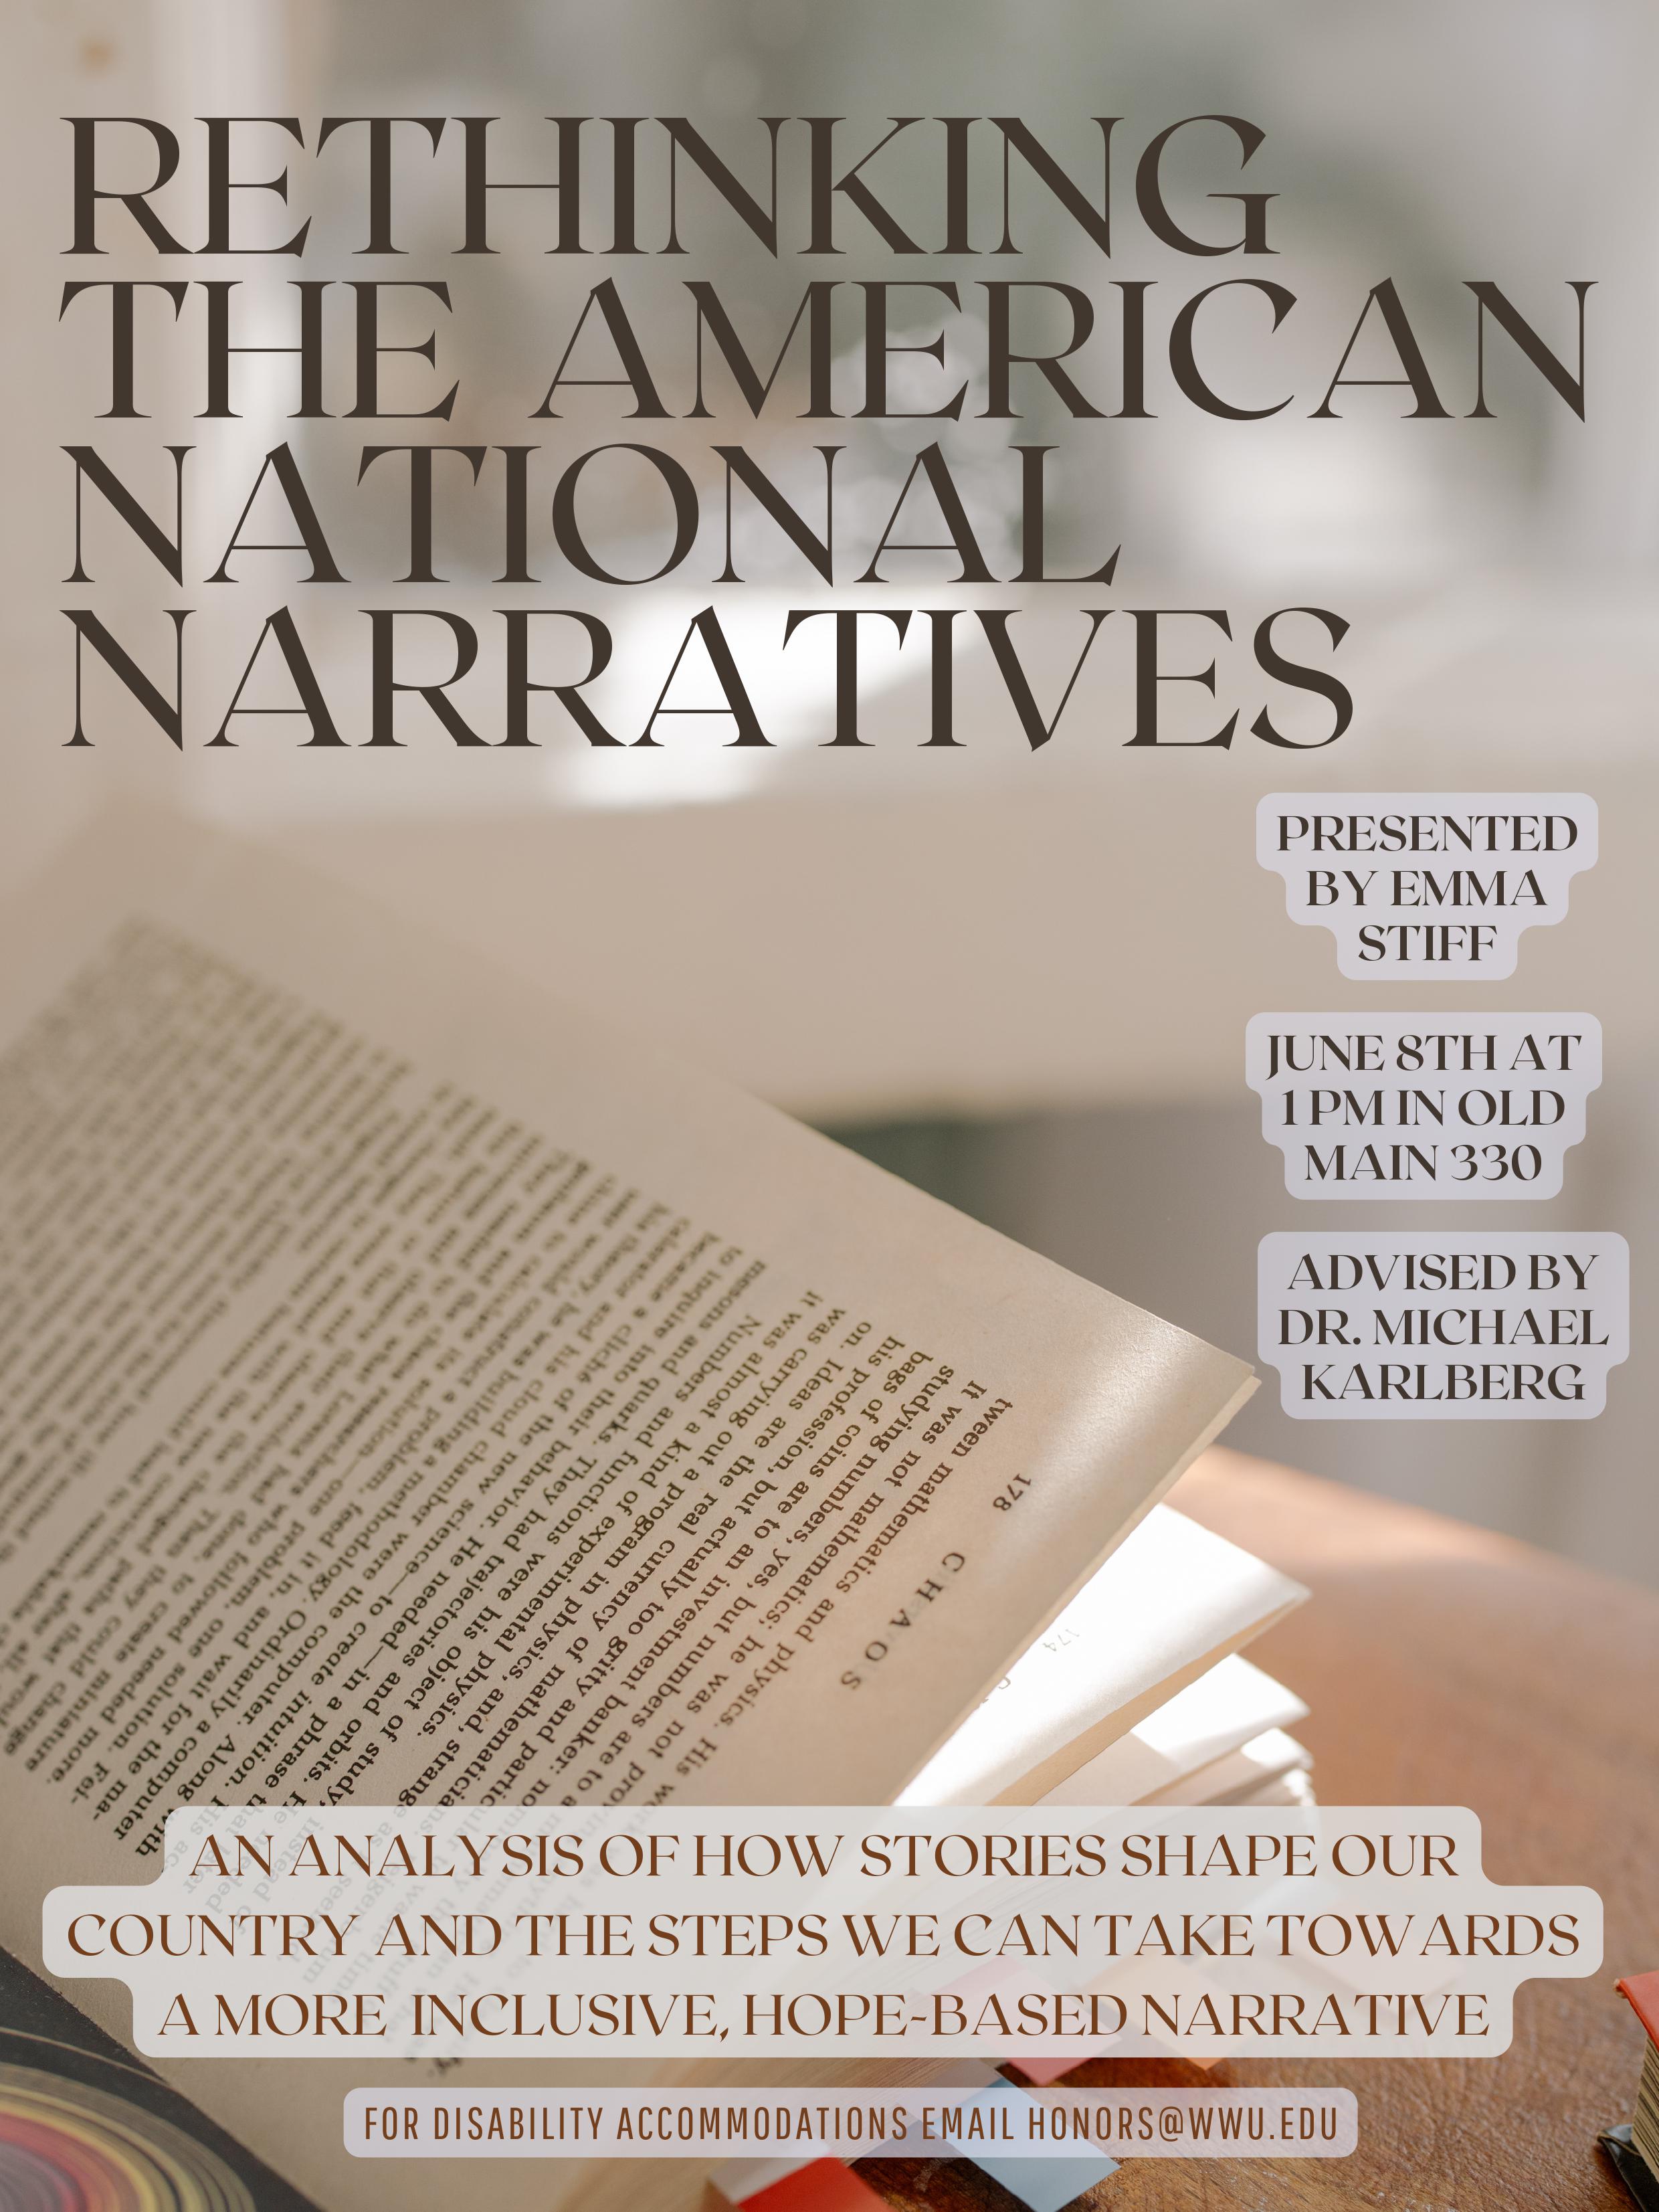 A poster with a picture of an open book with sticky notes in it. Text reads: "rethinking the american national narratives. Presented by Emma Stiff; June 8th At 1pm in Old Main 330; Advised by Dr. Michael Karlberg. An analysis of how stories shape our country and the steps we can take towards an inclusive, hope-based narrative. For disability accommodations email honors@wwu.edu"